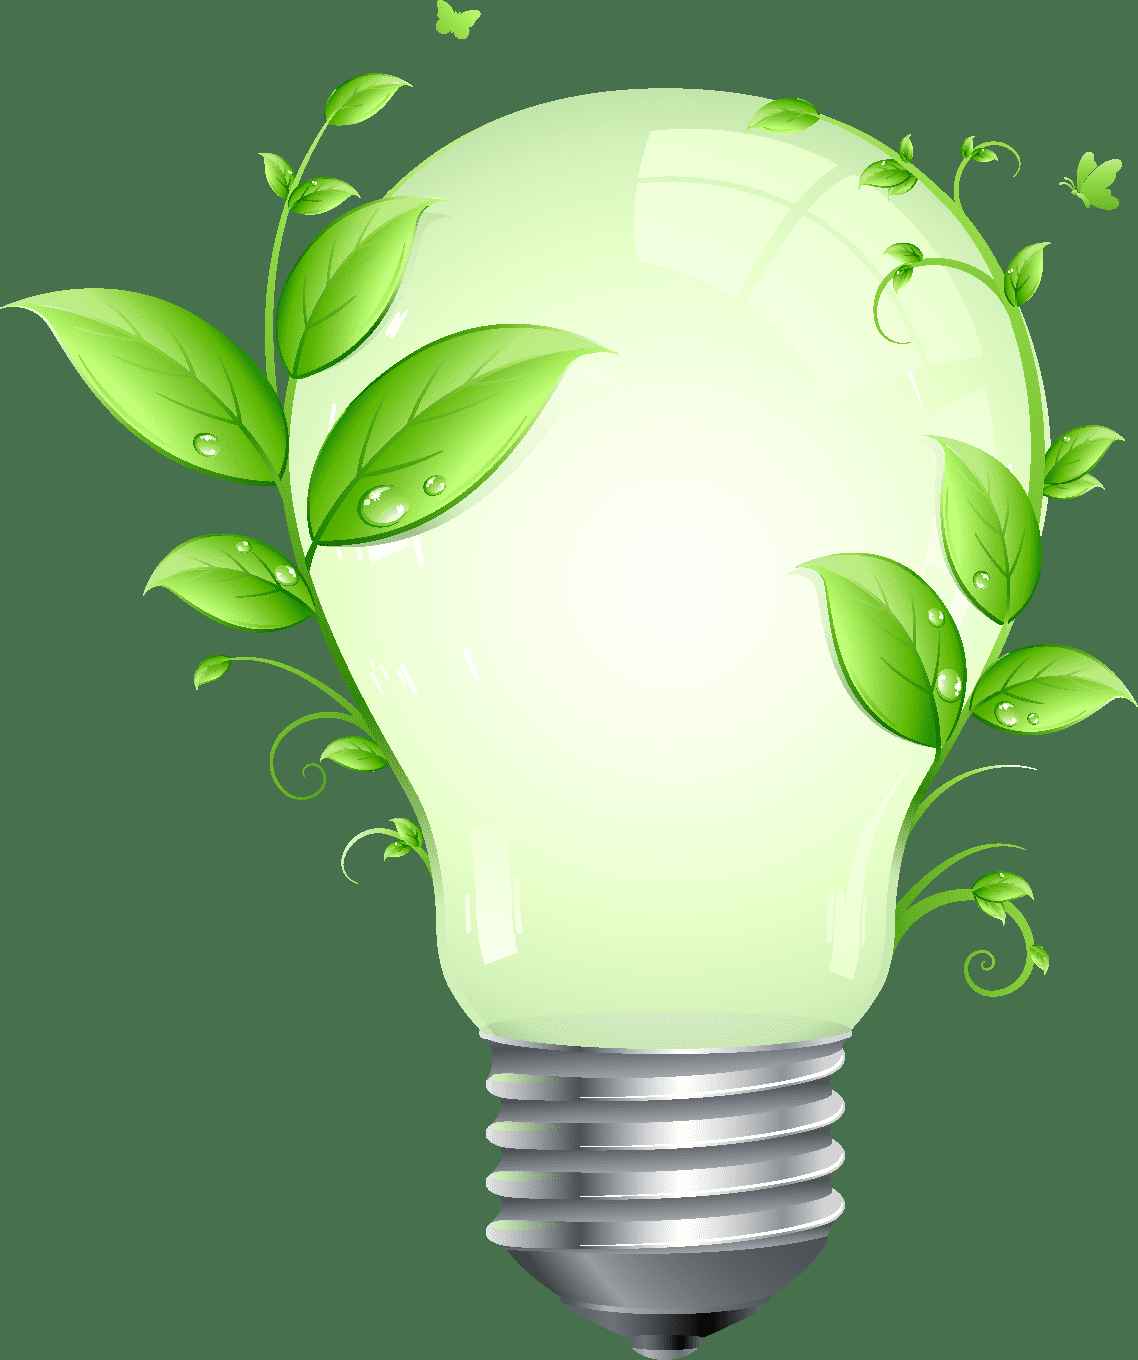 Green Leaf and Energy Saving Lamp Vector png